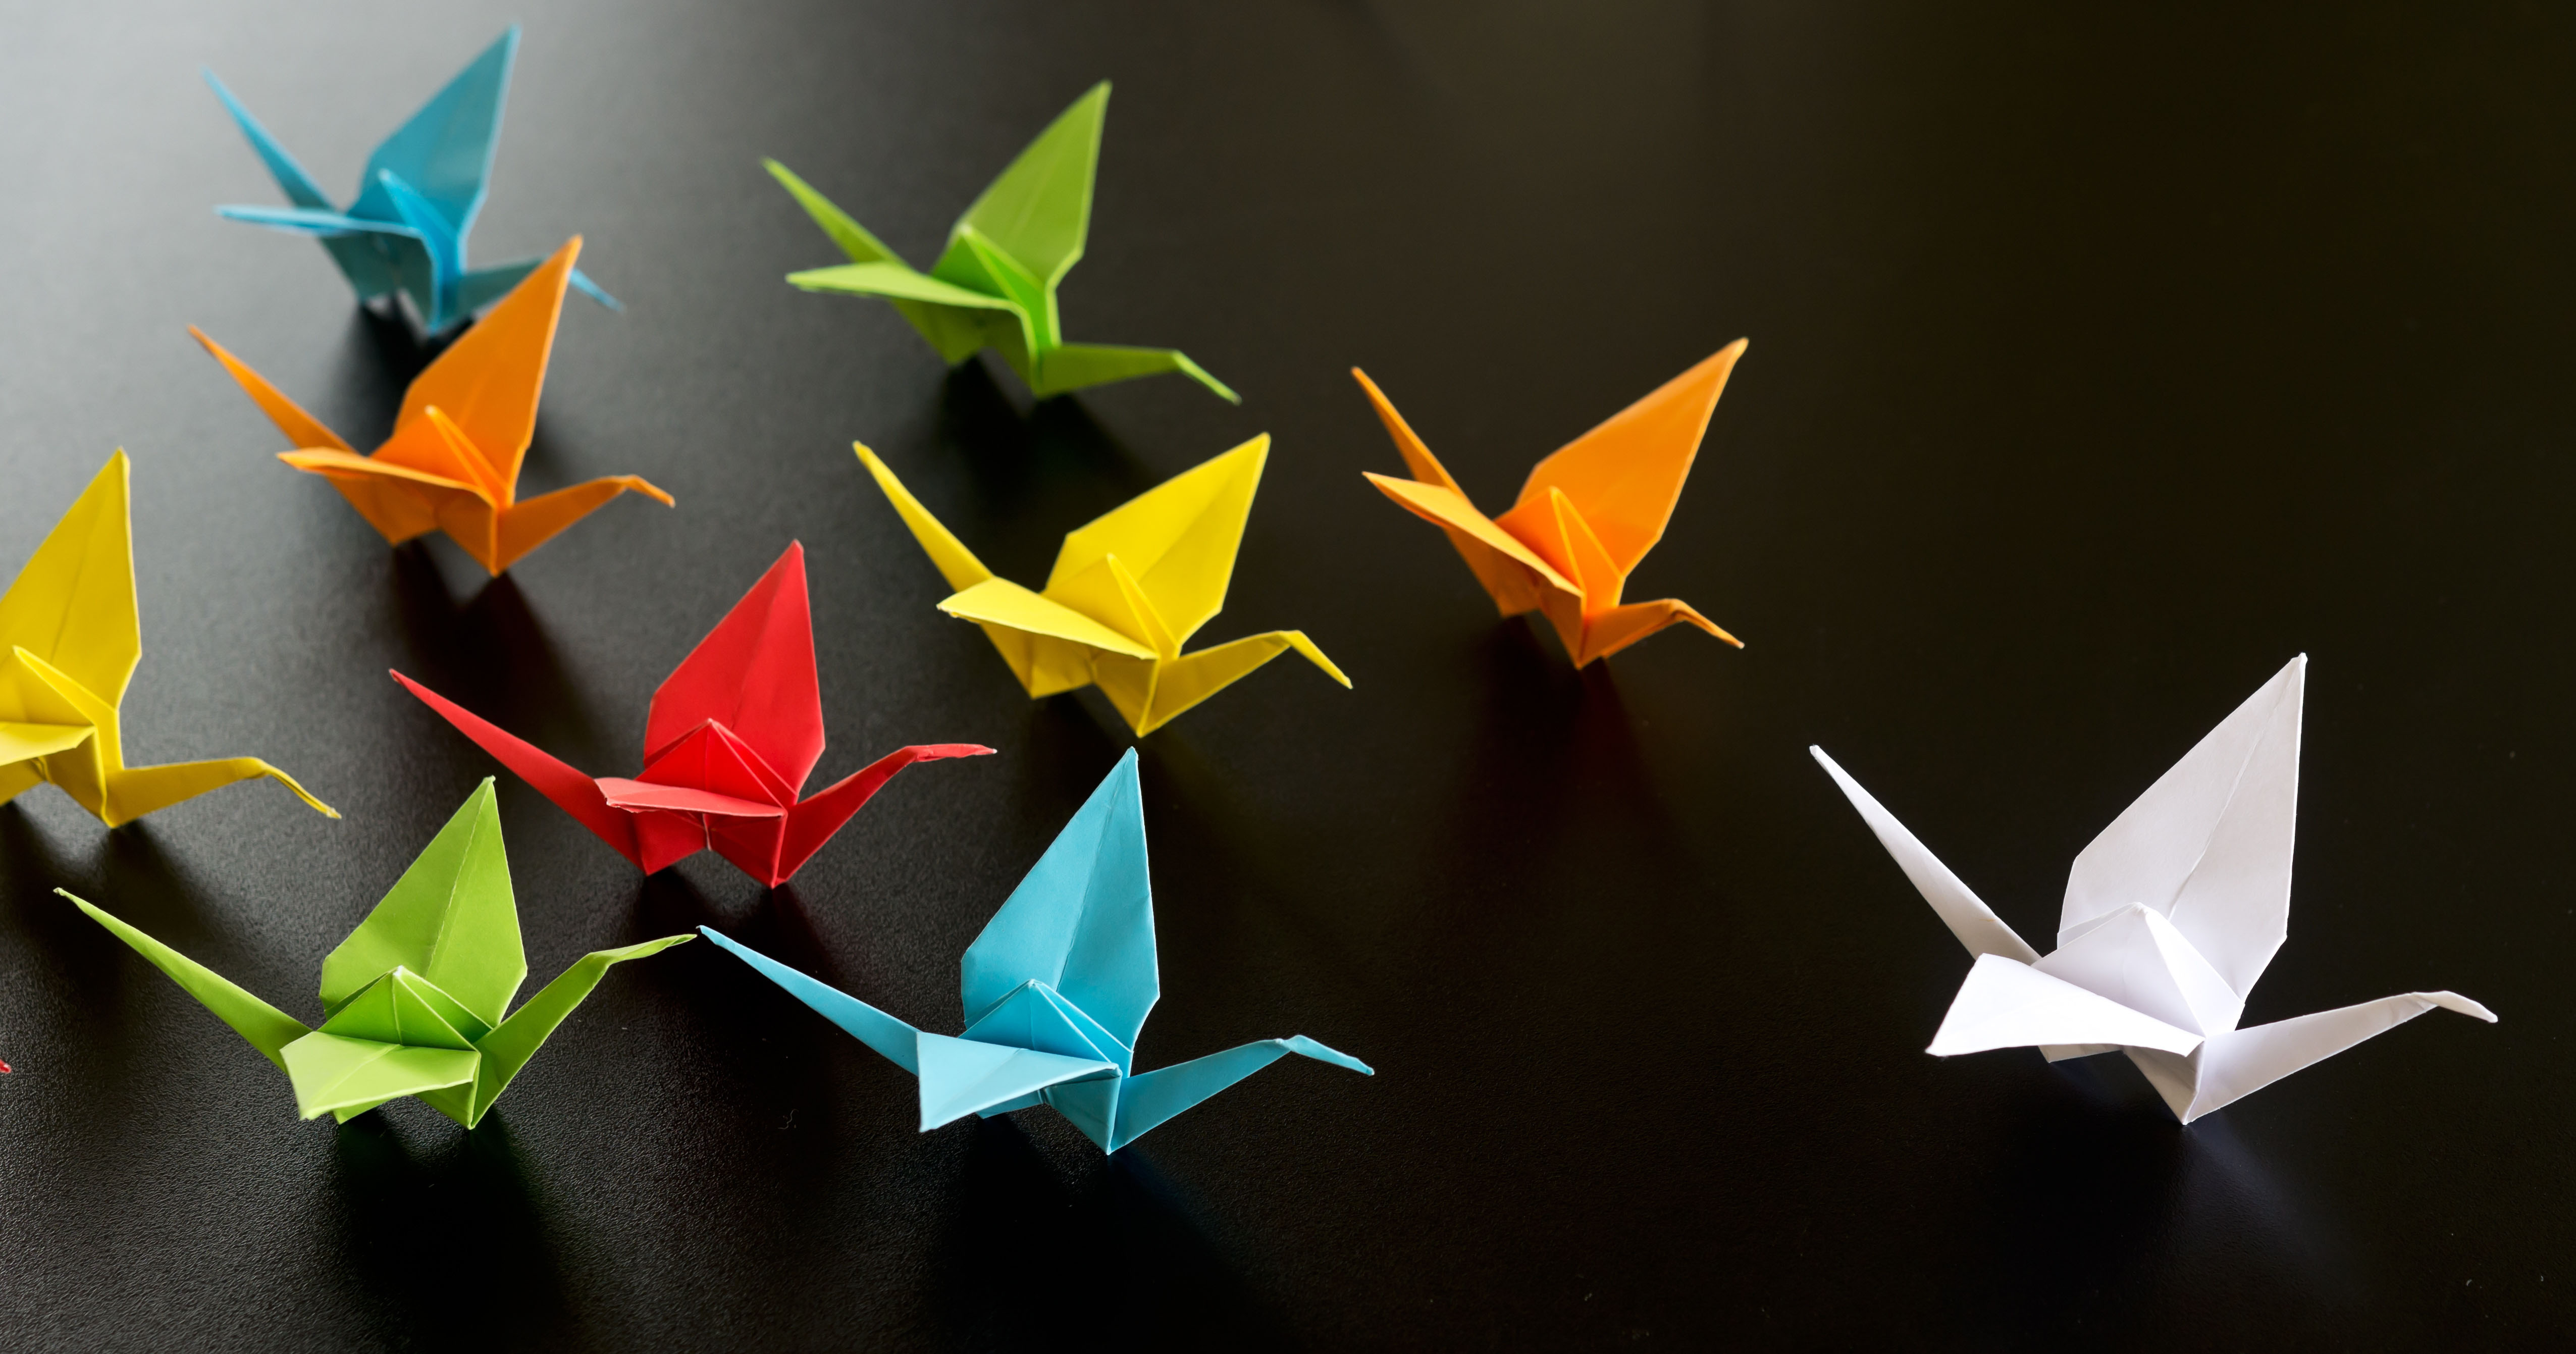 How to Make an Origami Pelican – Origami Bird